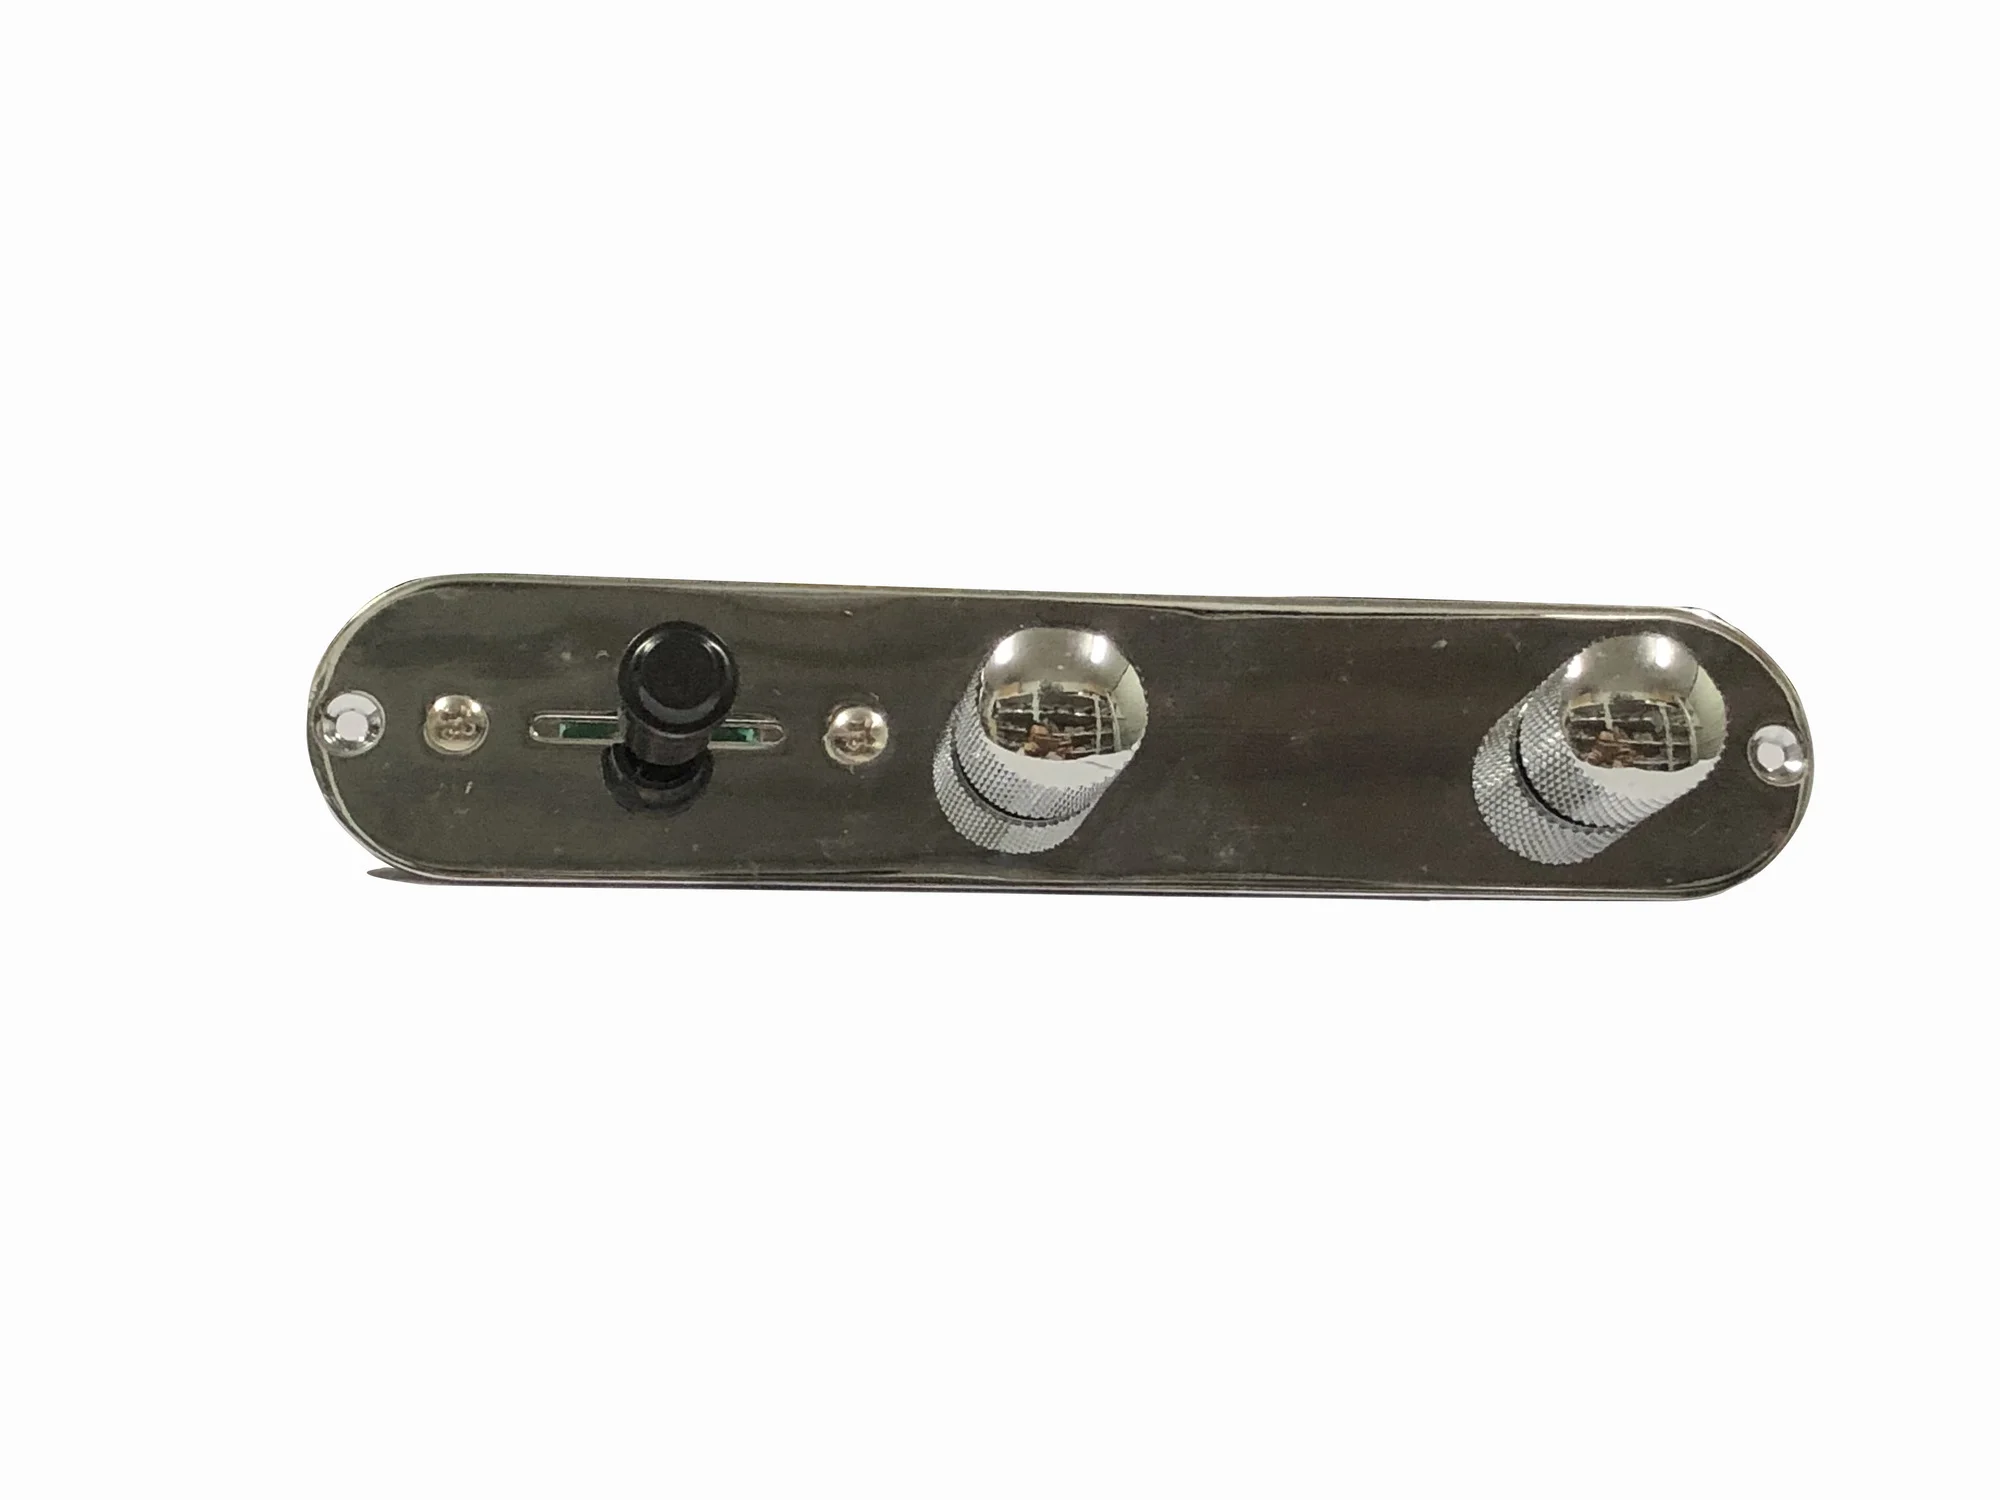 Hot Free Shipping wired TL guitar control plate system chrome color guitar control plate assembly guitar parts enlarge